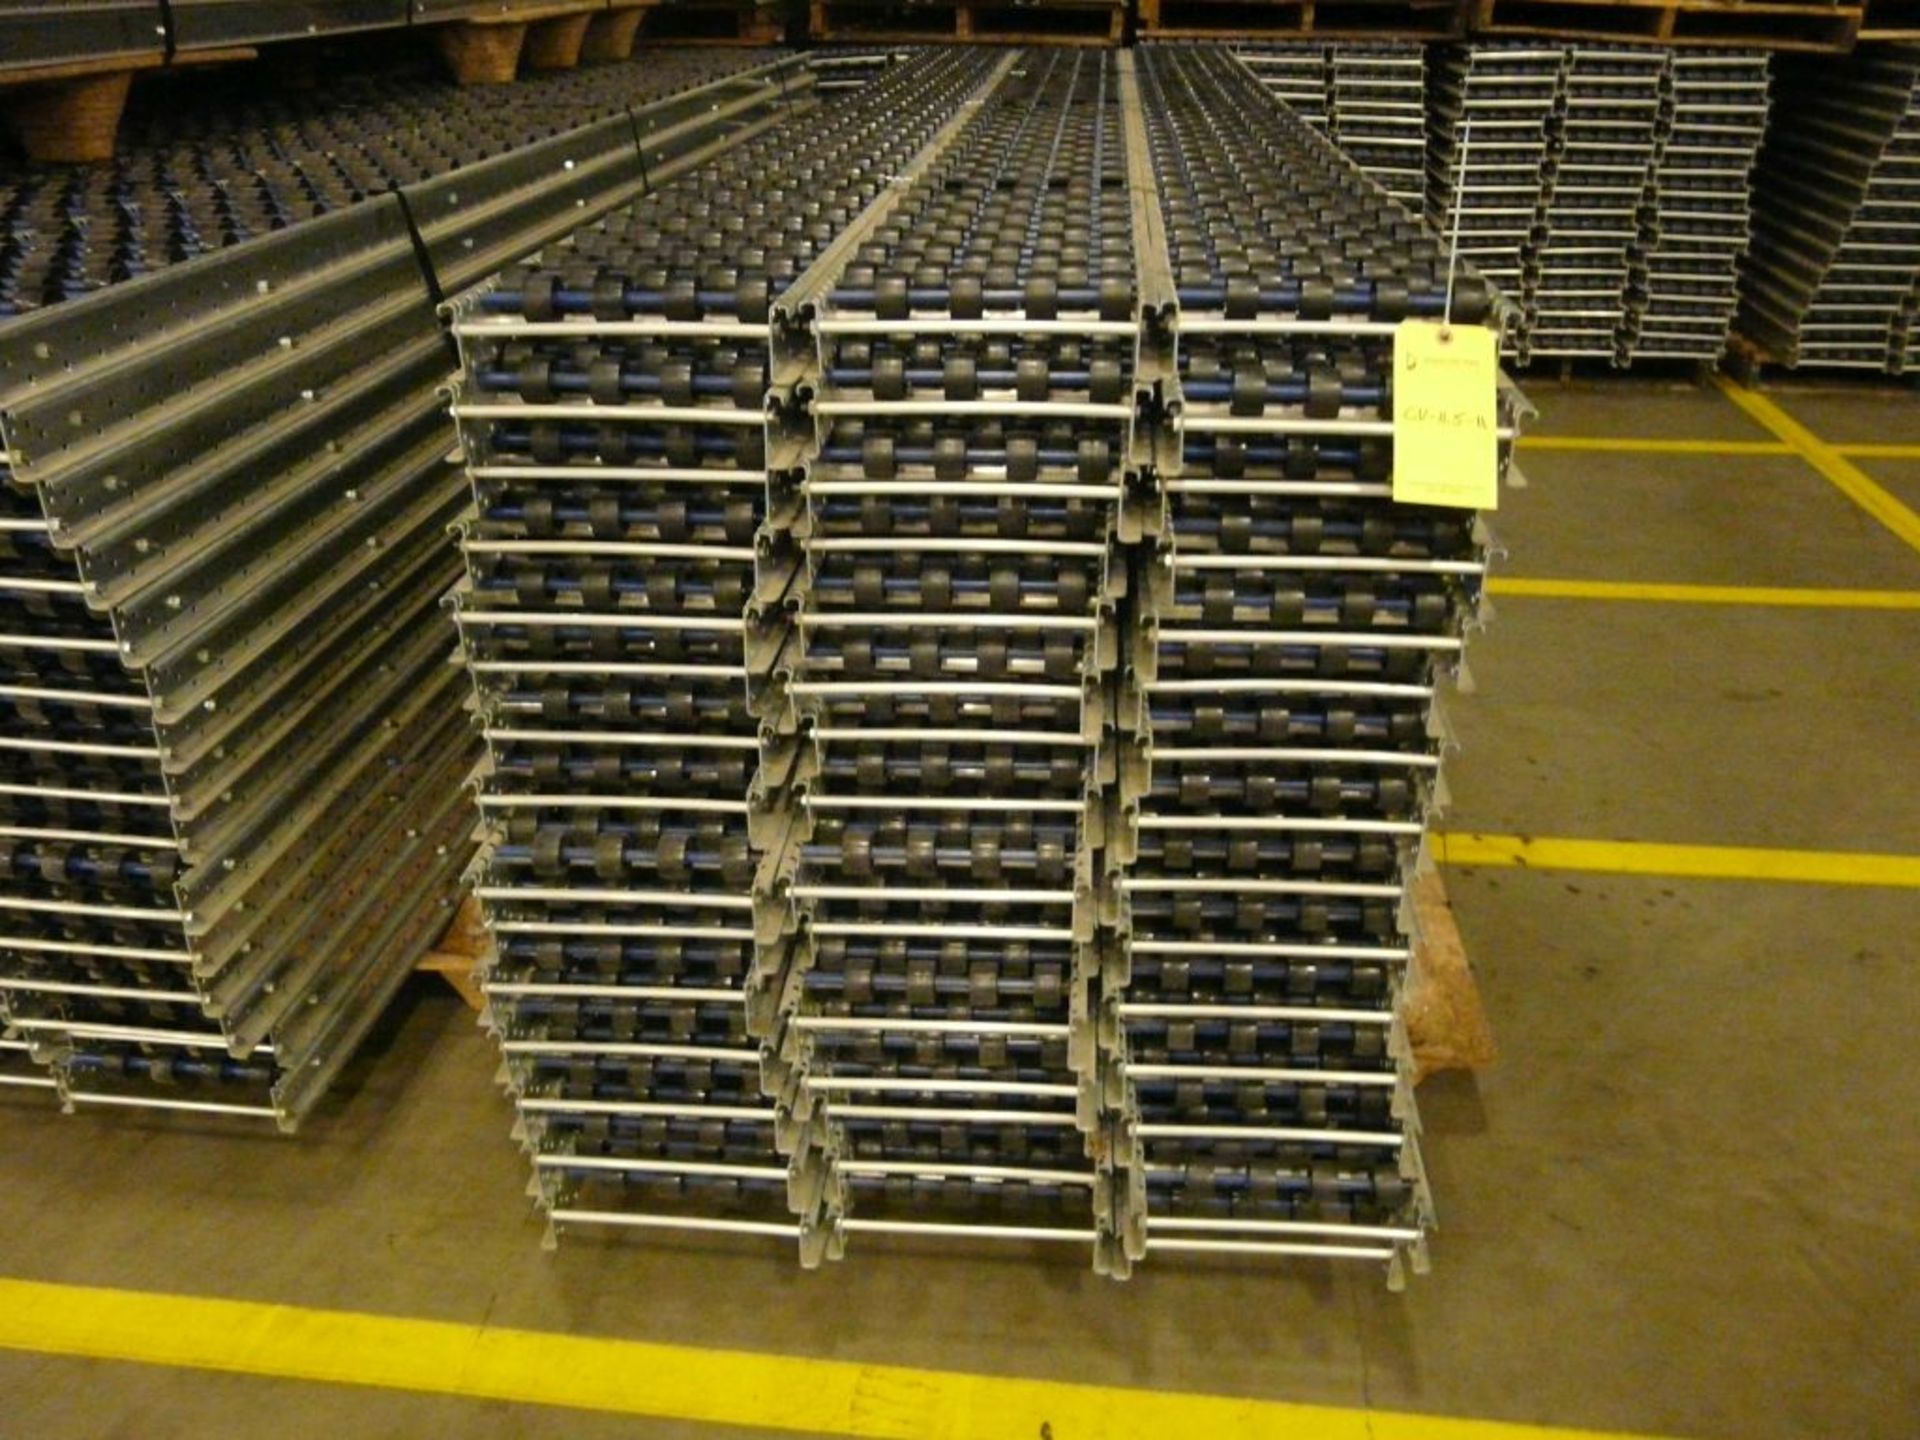 Lot of (90) SpanTrack Wheelbed Carton Flow Conveyors - 11.5'L x 11"W; Tag: 223640 - $30 Lot - Image 2 of 4